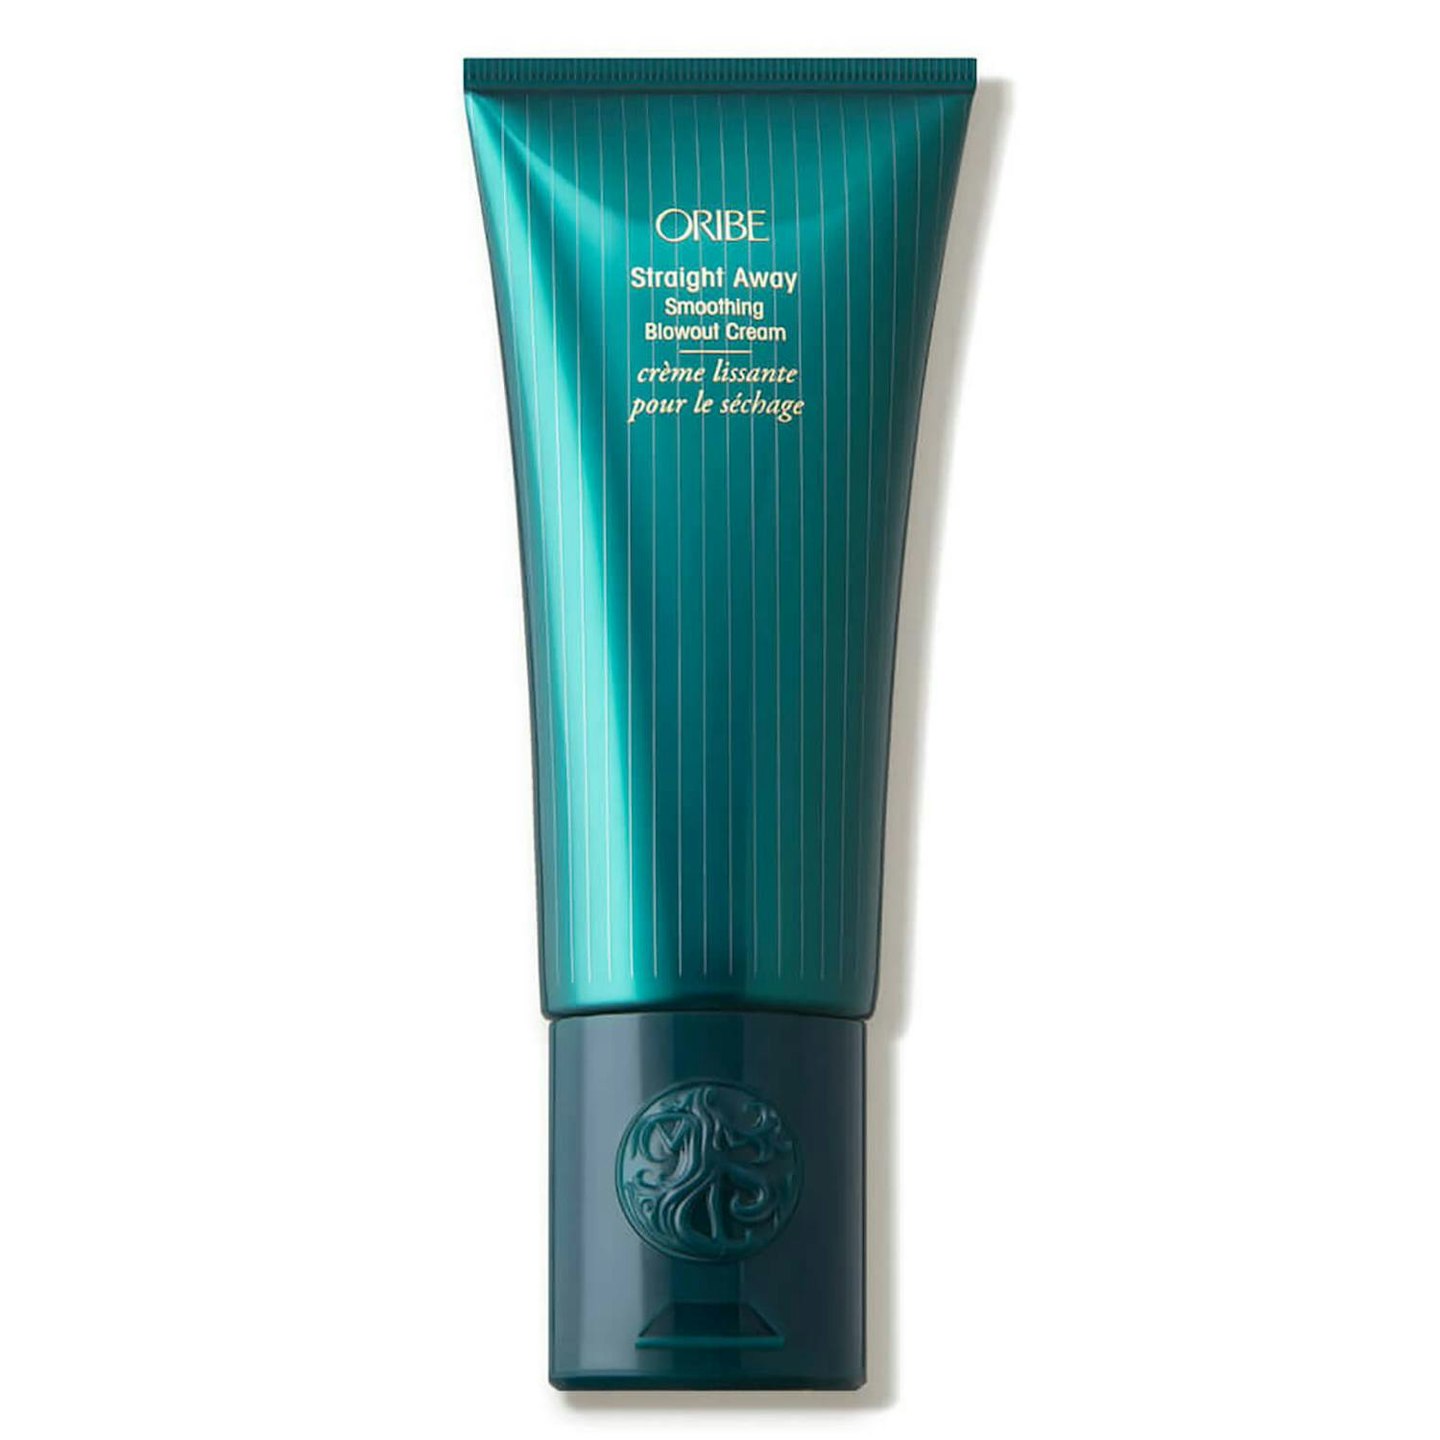 Oribe Straight Away Smoothing Blowout Cream, £48